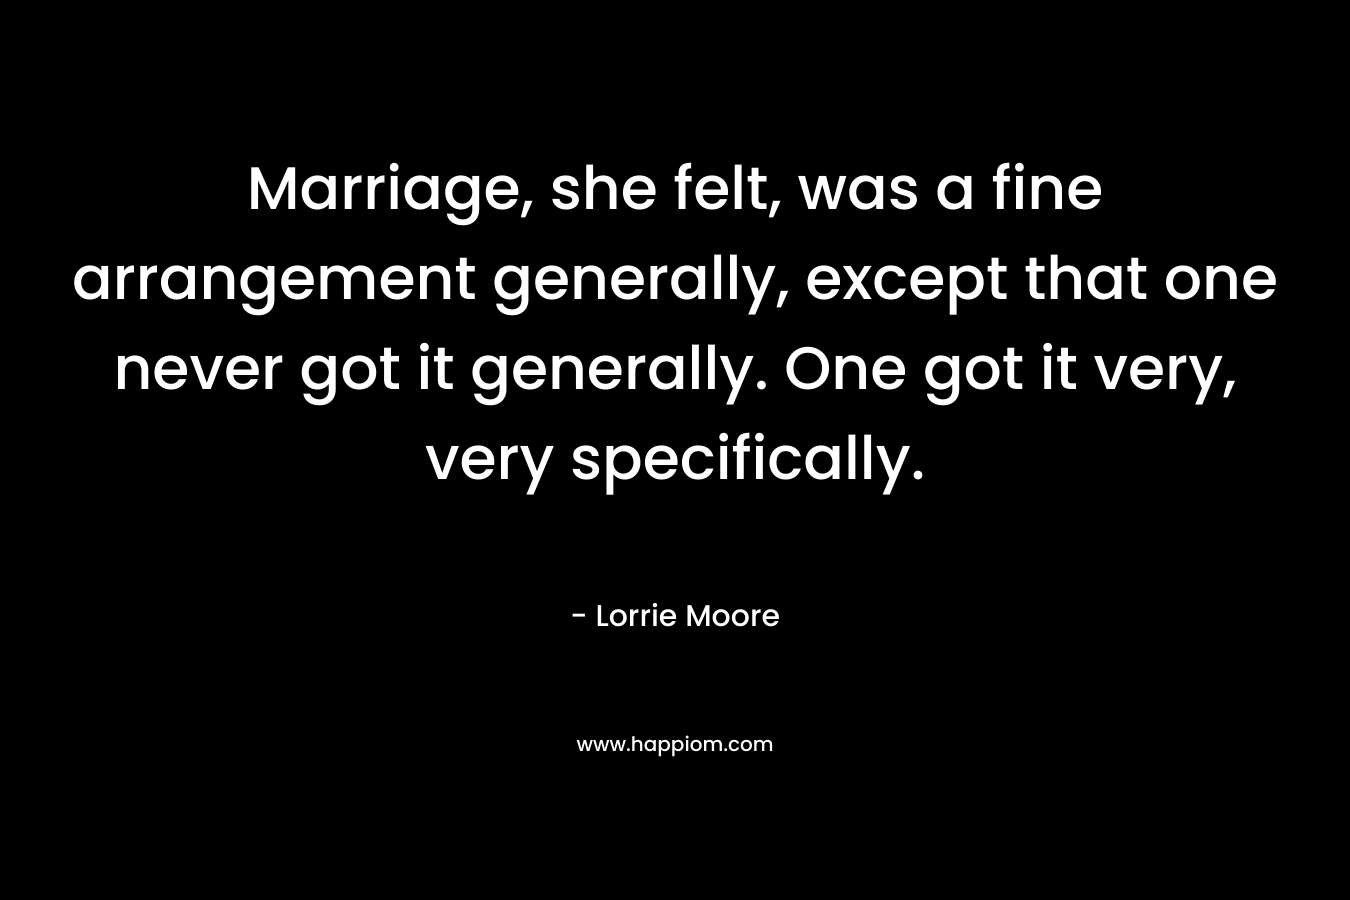 Marriage, she felt, was a fine arrangement generally, except that one never got it generally. One got it very, very specifically. – Lorrie Moore